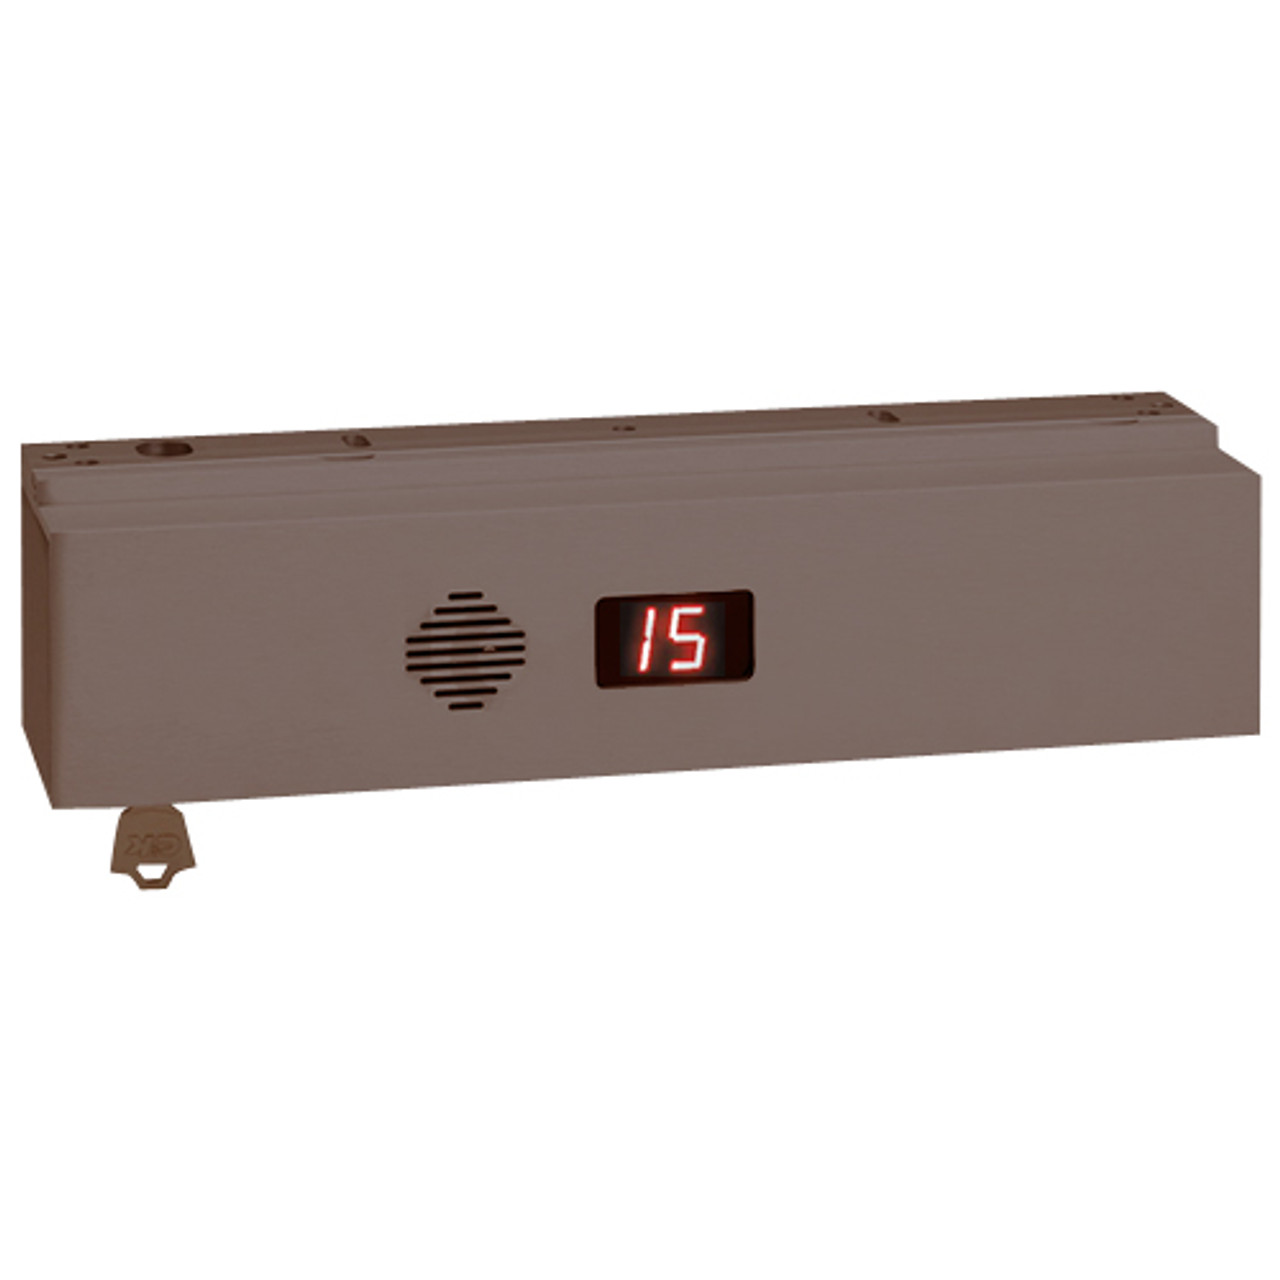 1511S-NC-K-X-BA SDC 1511S Series Single Integrated Delayed Egress Locks with Magnetic Bond Sensor and Anti-Tamper Switch in Dark Bronze